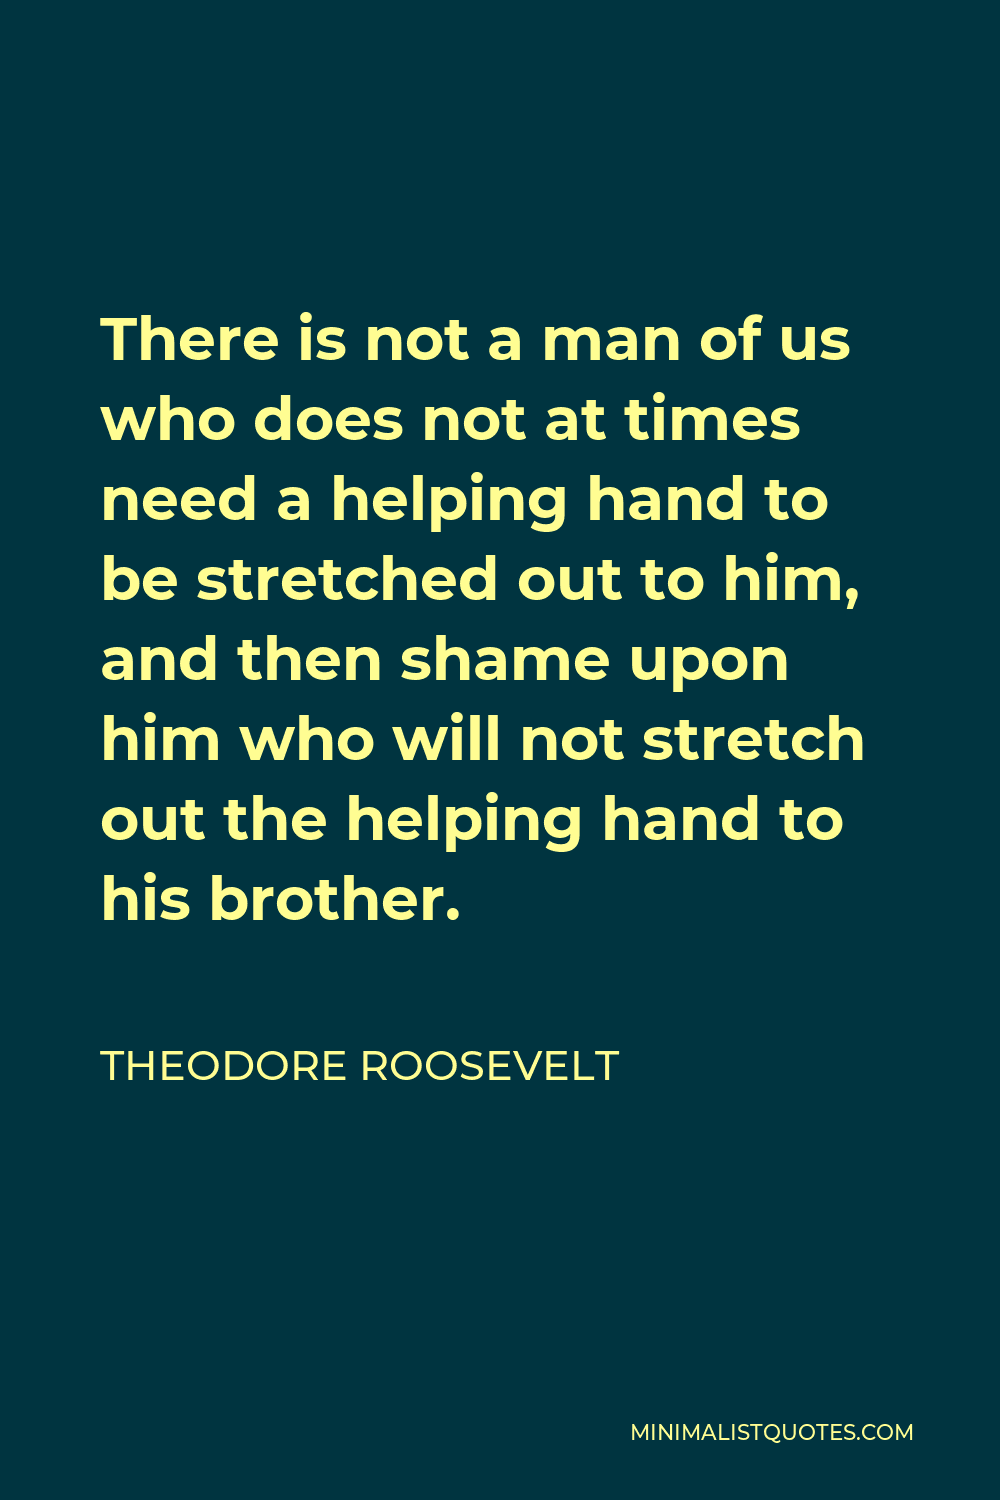 Theodore Roosevelt Quote - There is not a man of us who does not at times need a helping hand to be stretched out to him, and then shame upon him who will not stretch out the helping hand to his brother.